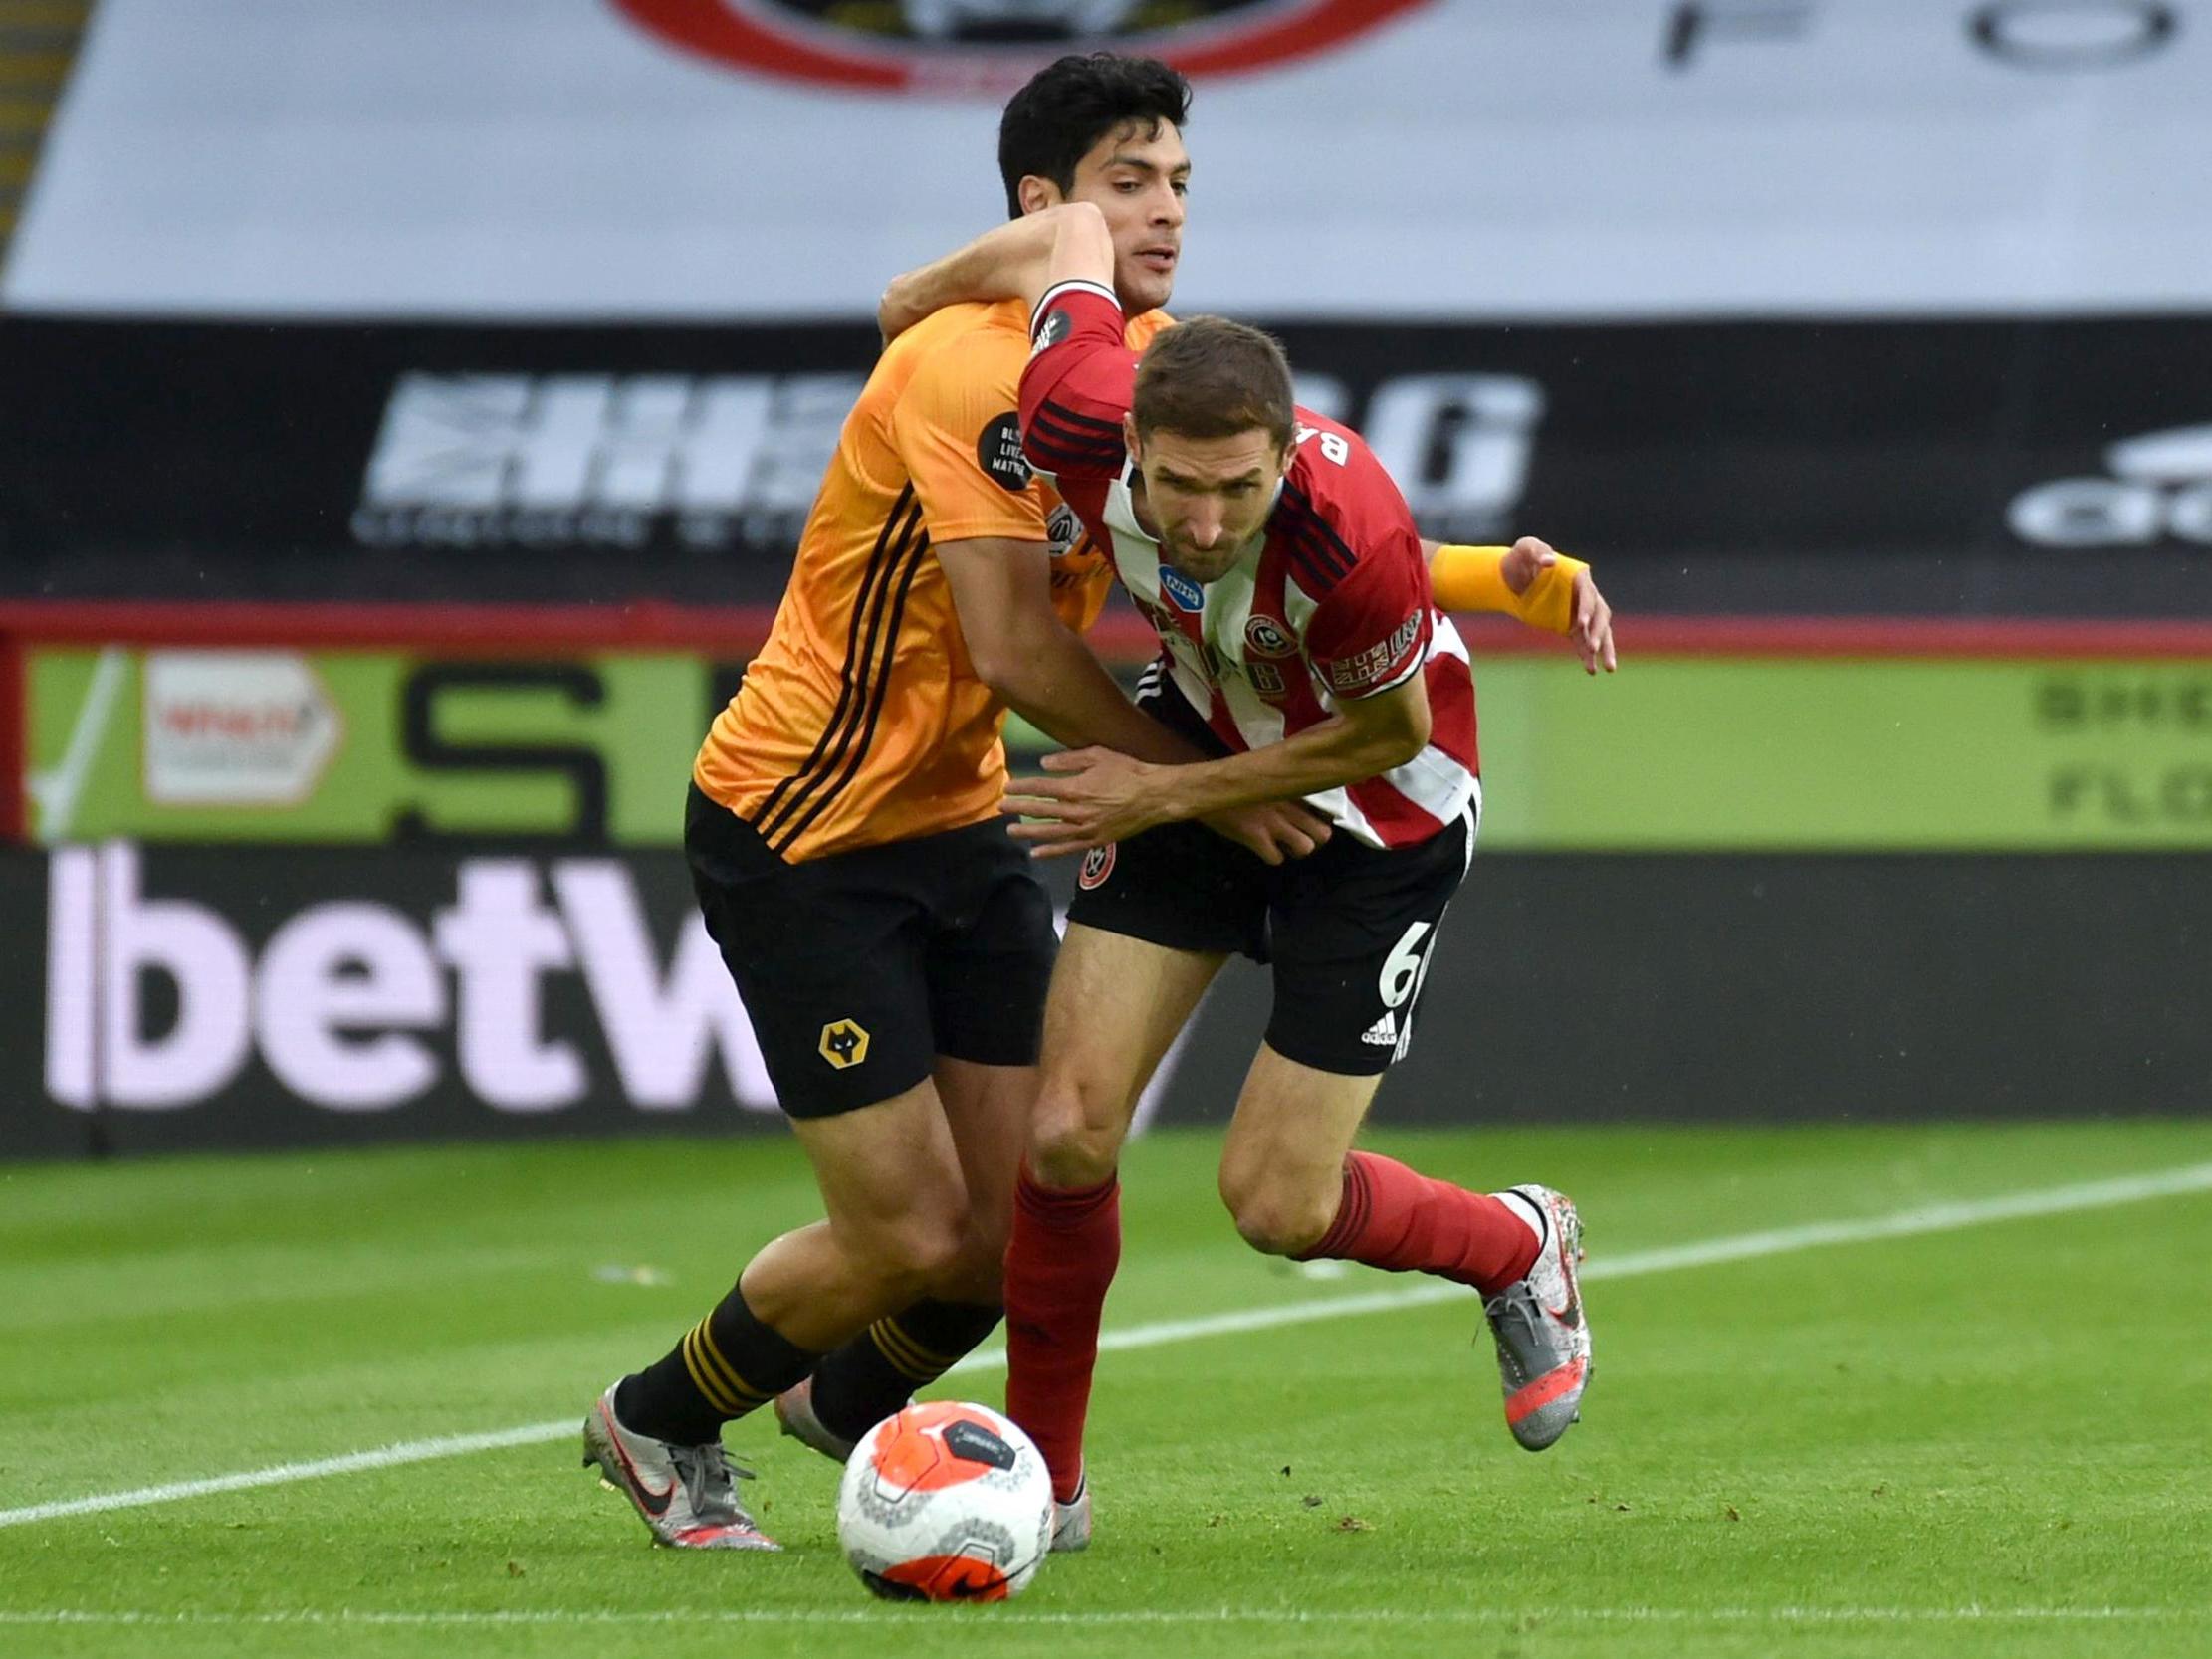 Sheffield United vs Wolves LIVE: Result, final score and reaction today